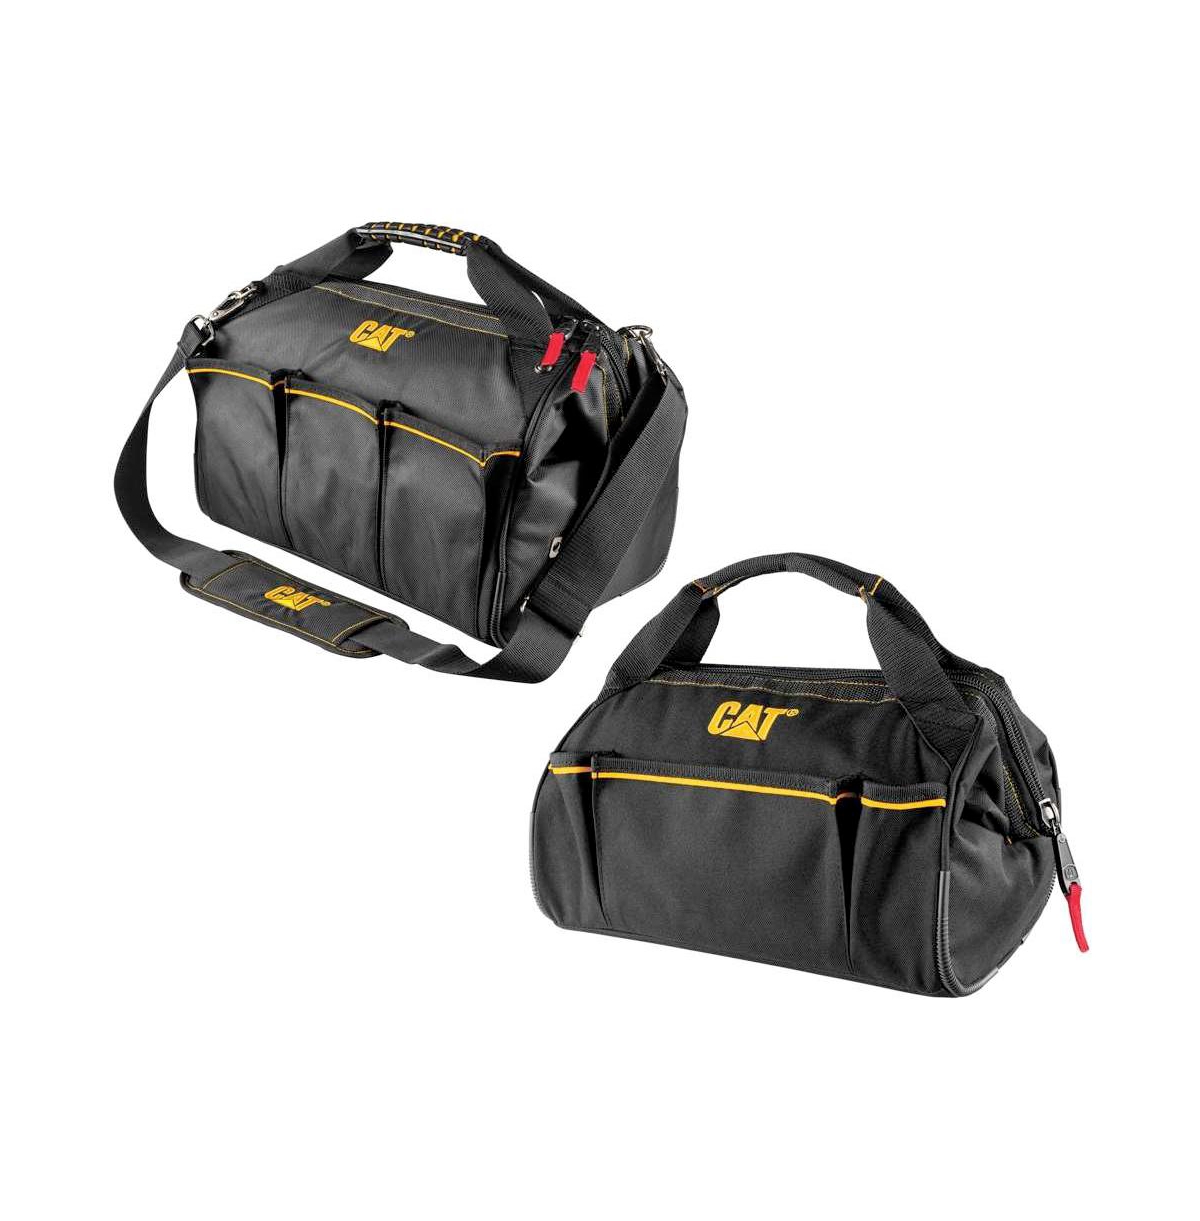 16 Inch Pro Wide-Mouth Tool Bag - Black